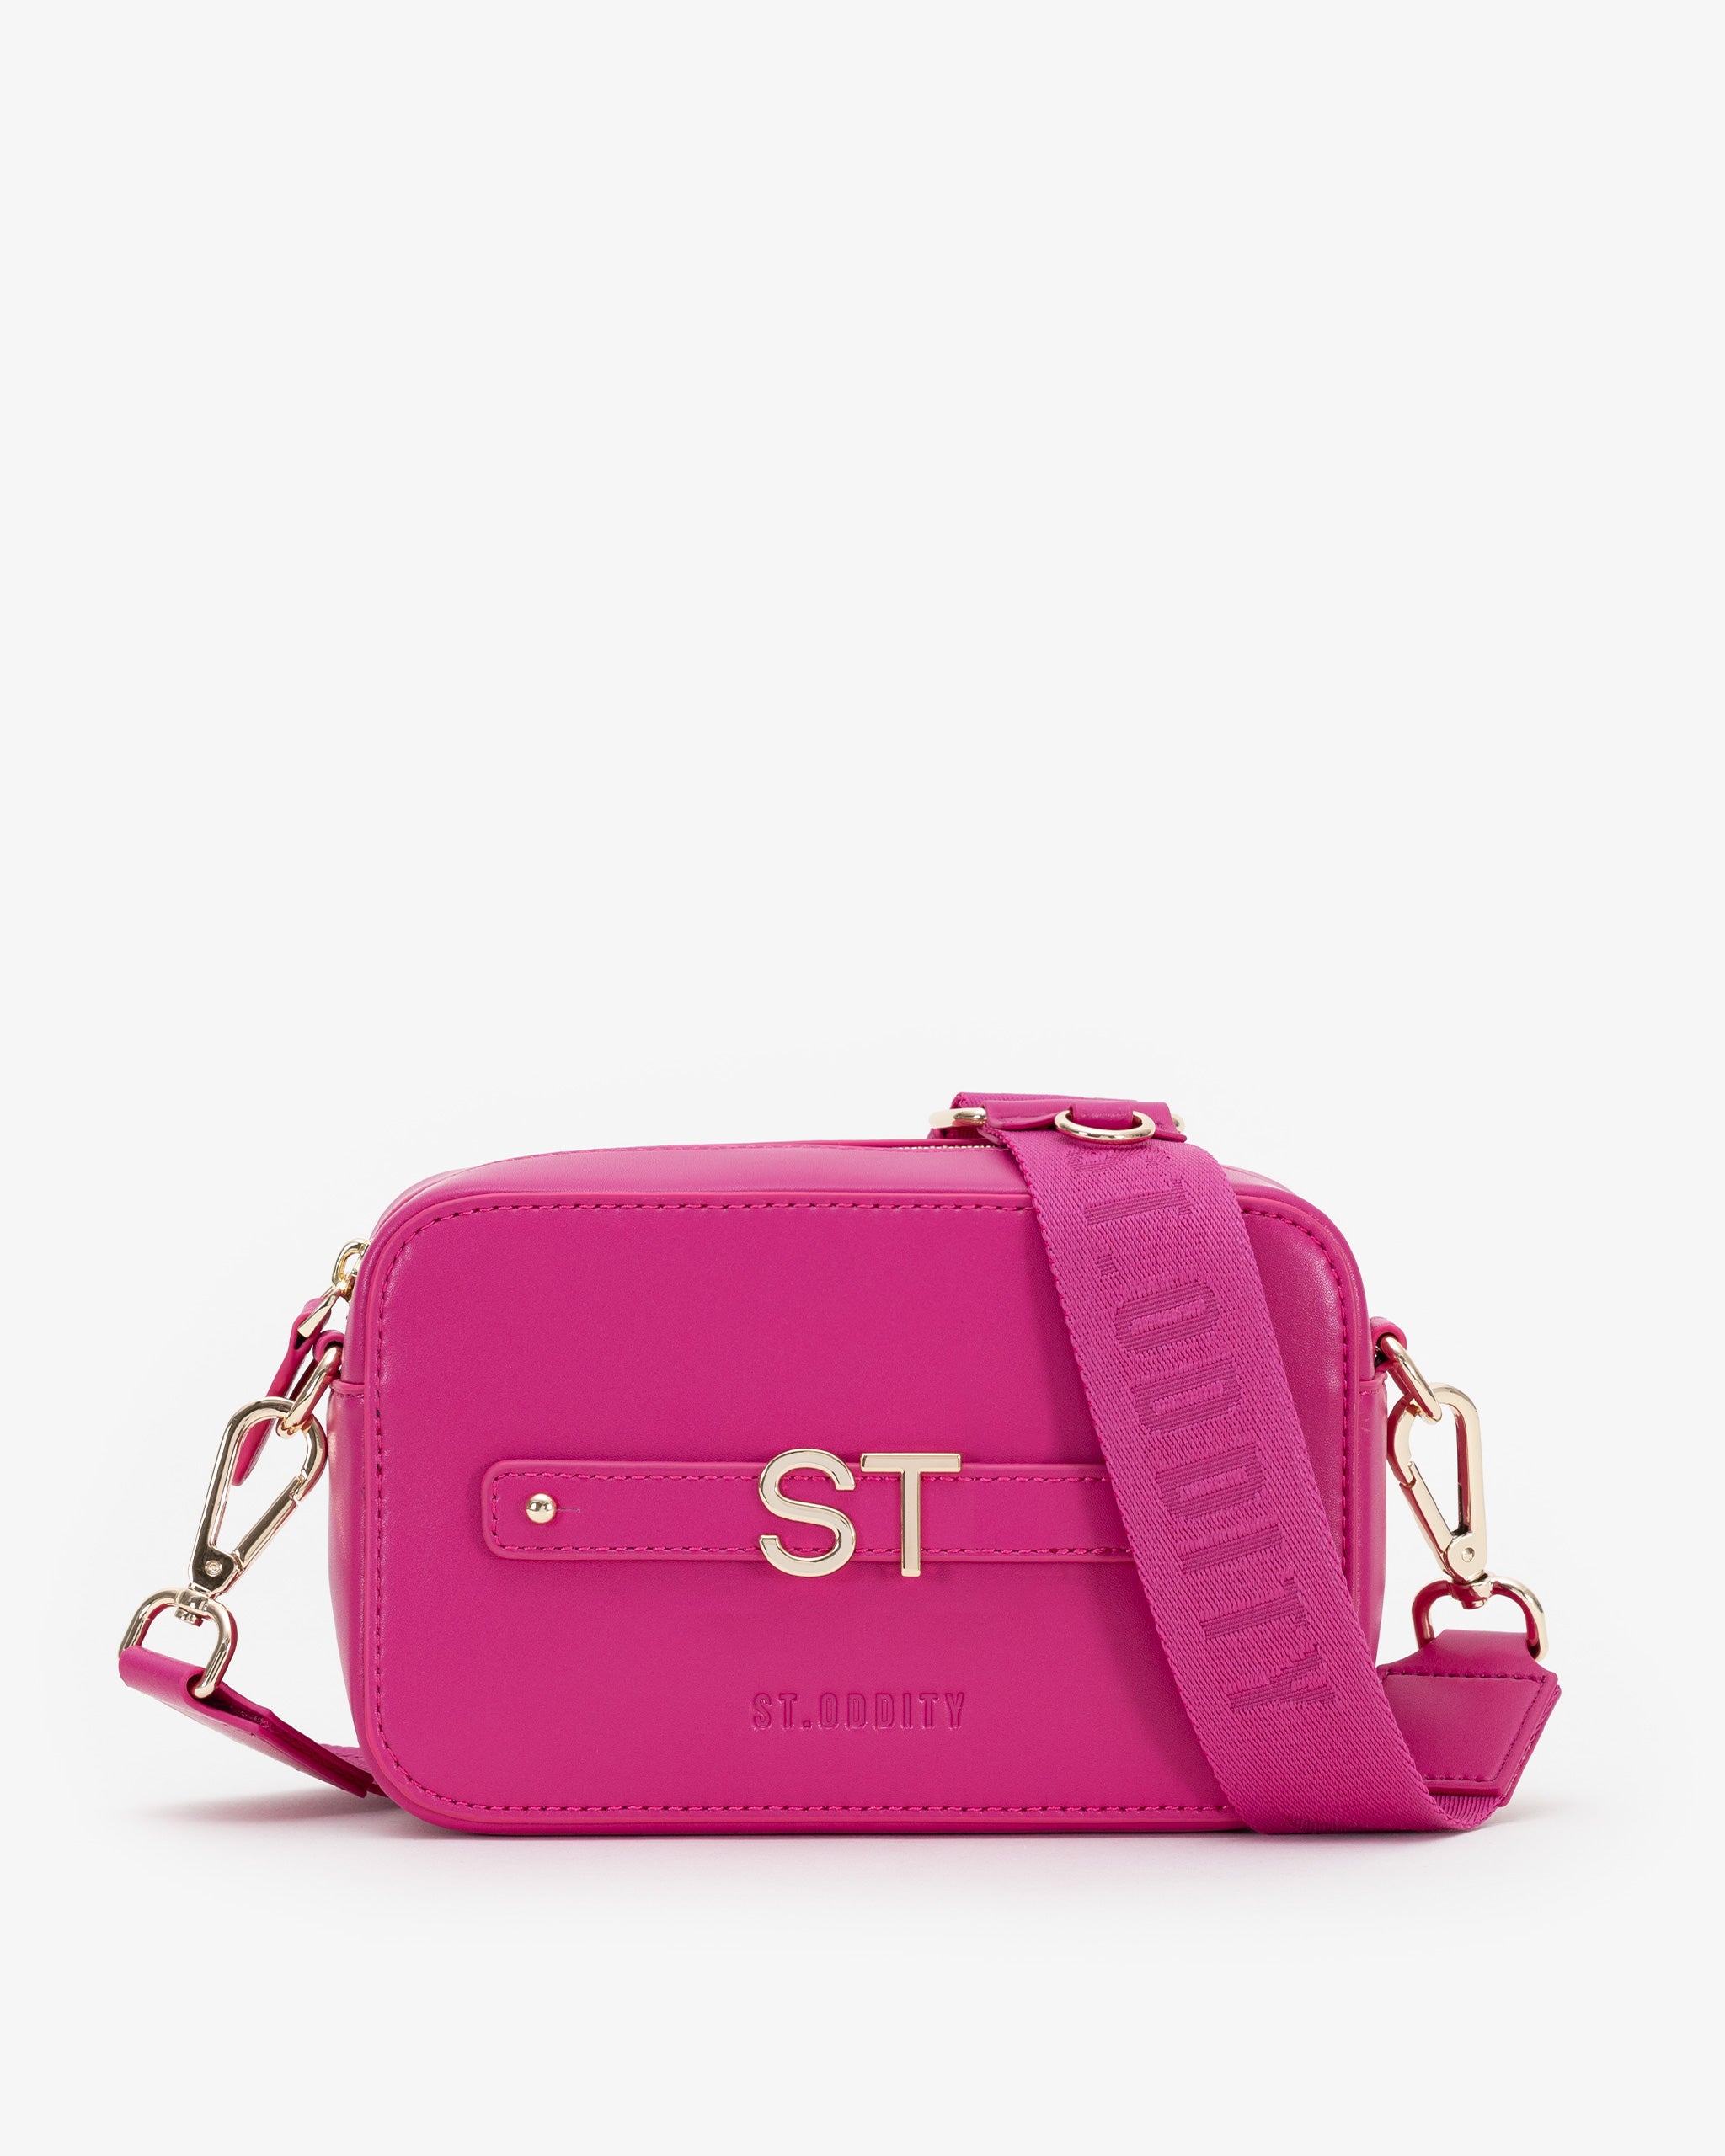 Pre-order (Mid-May): Zip Crossbody Bag in Fuchsia with Personalised Hardware